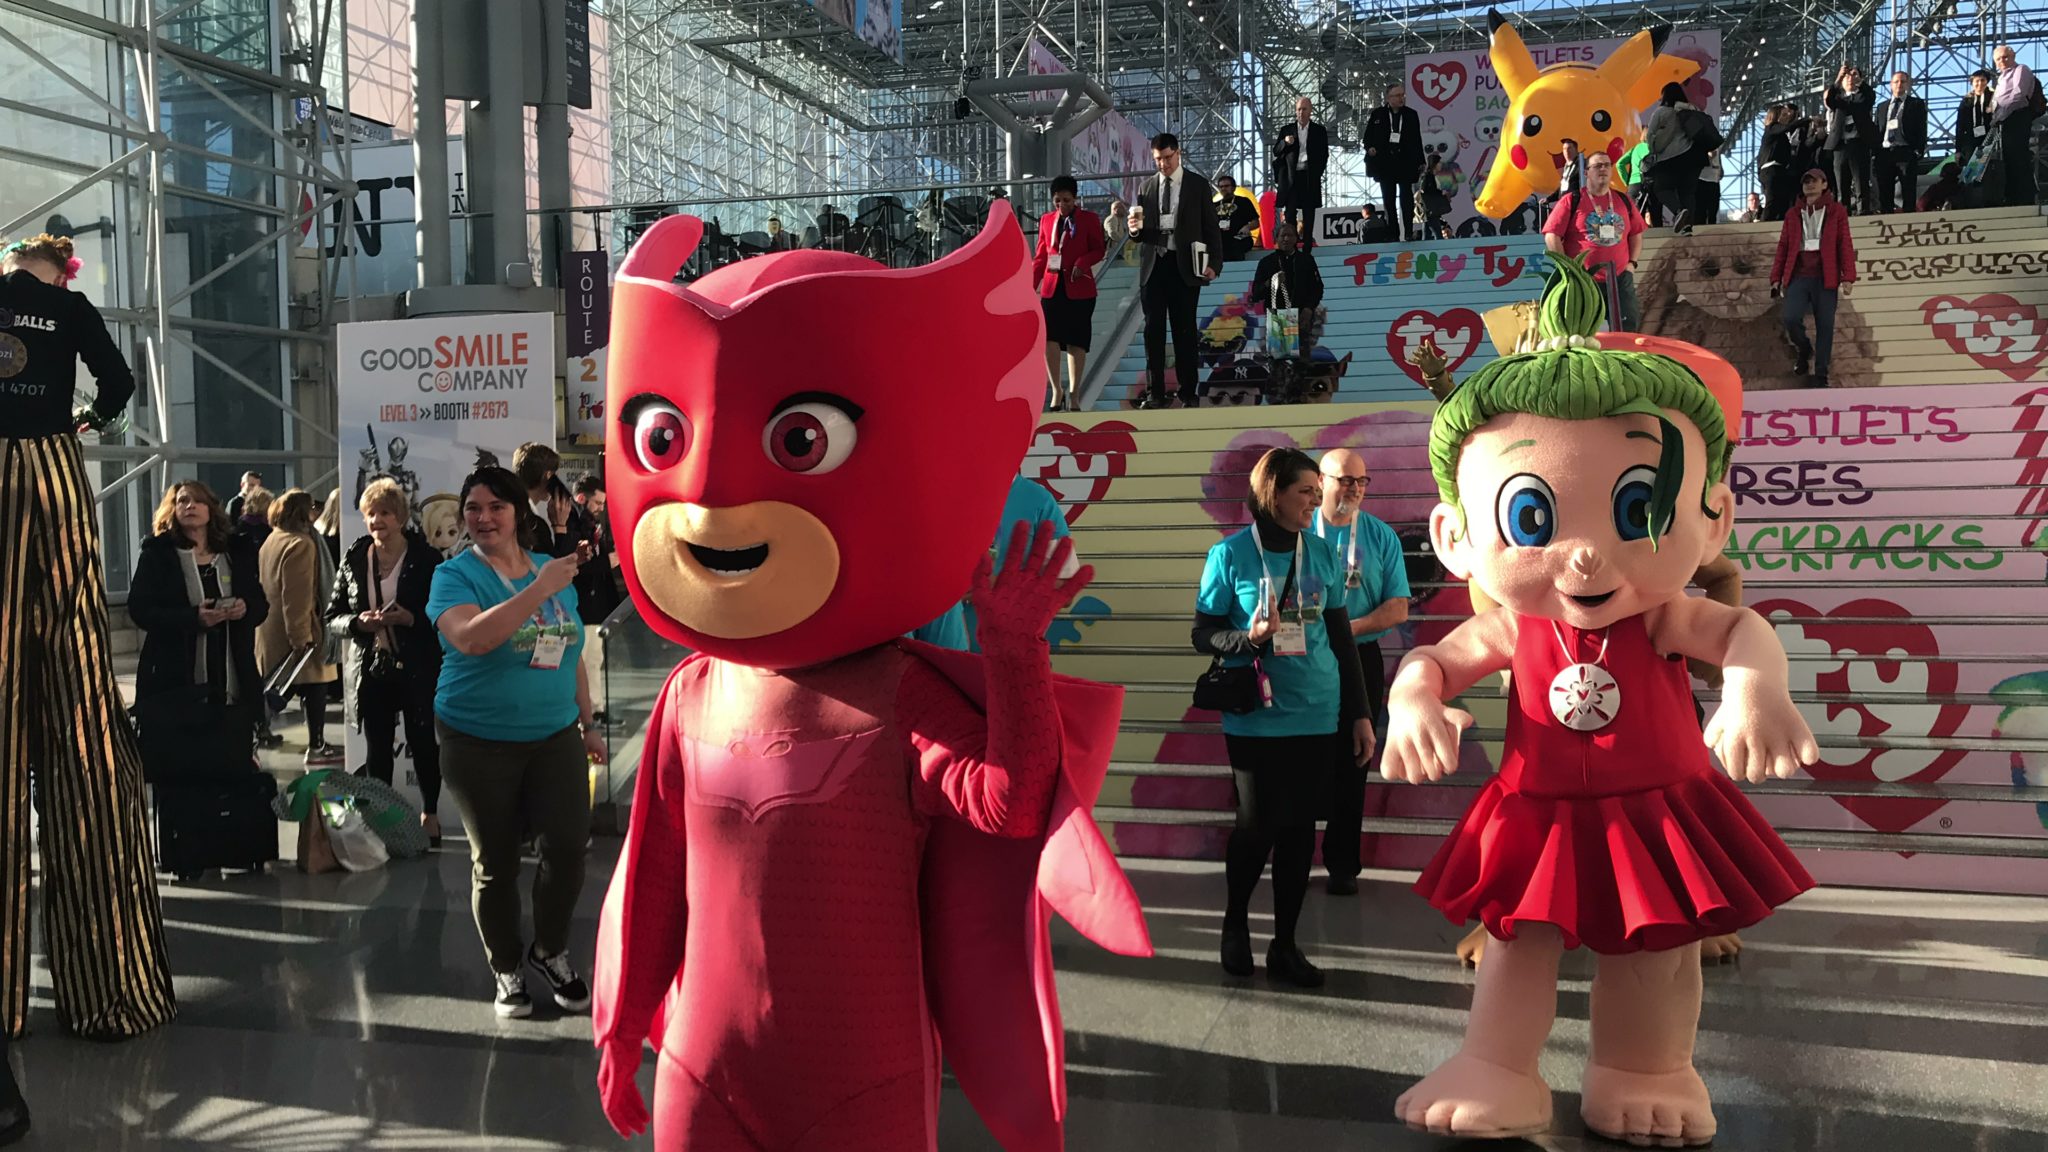 Cool New Toys Make This the Best Year to Play - Toy Fair 2018 Recap #TFNY